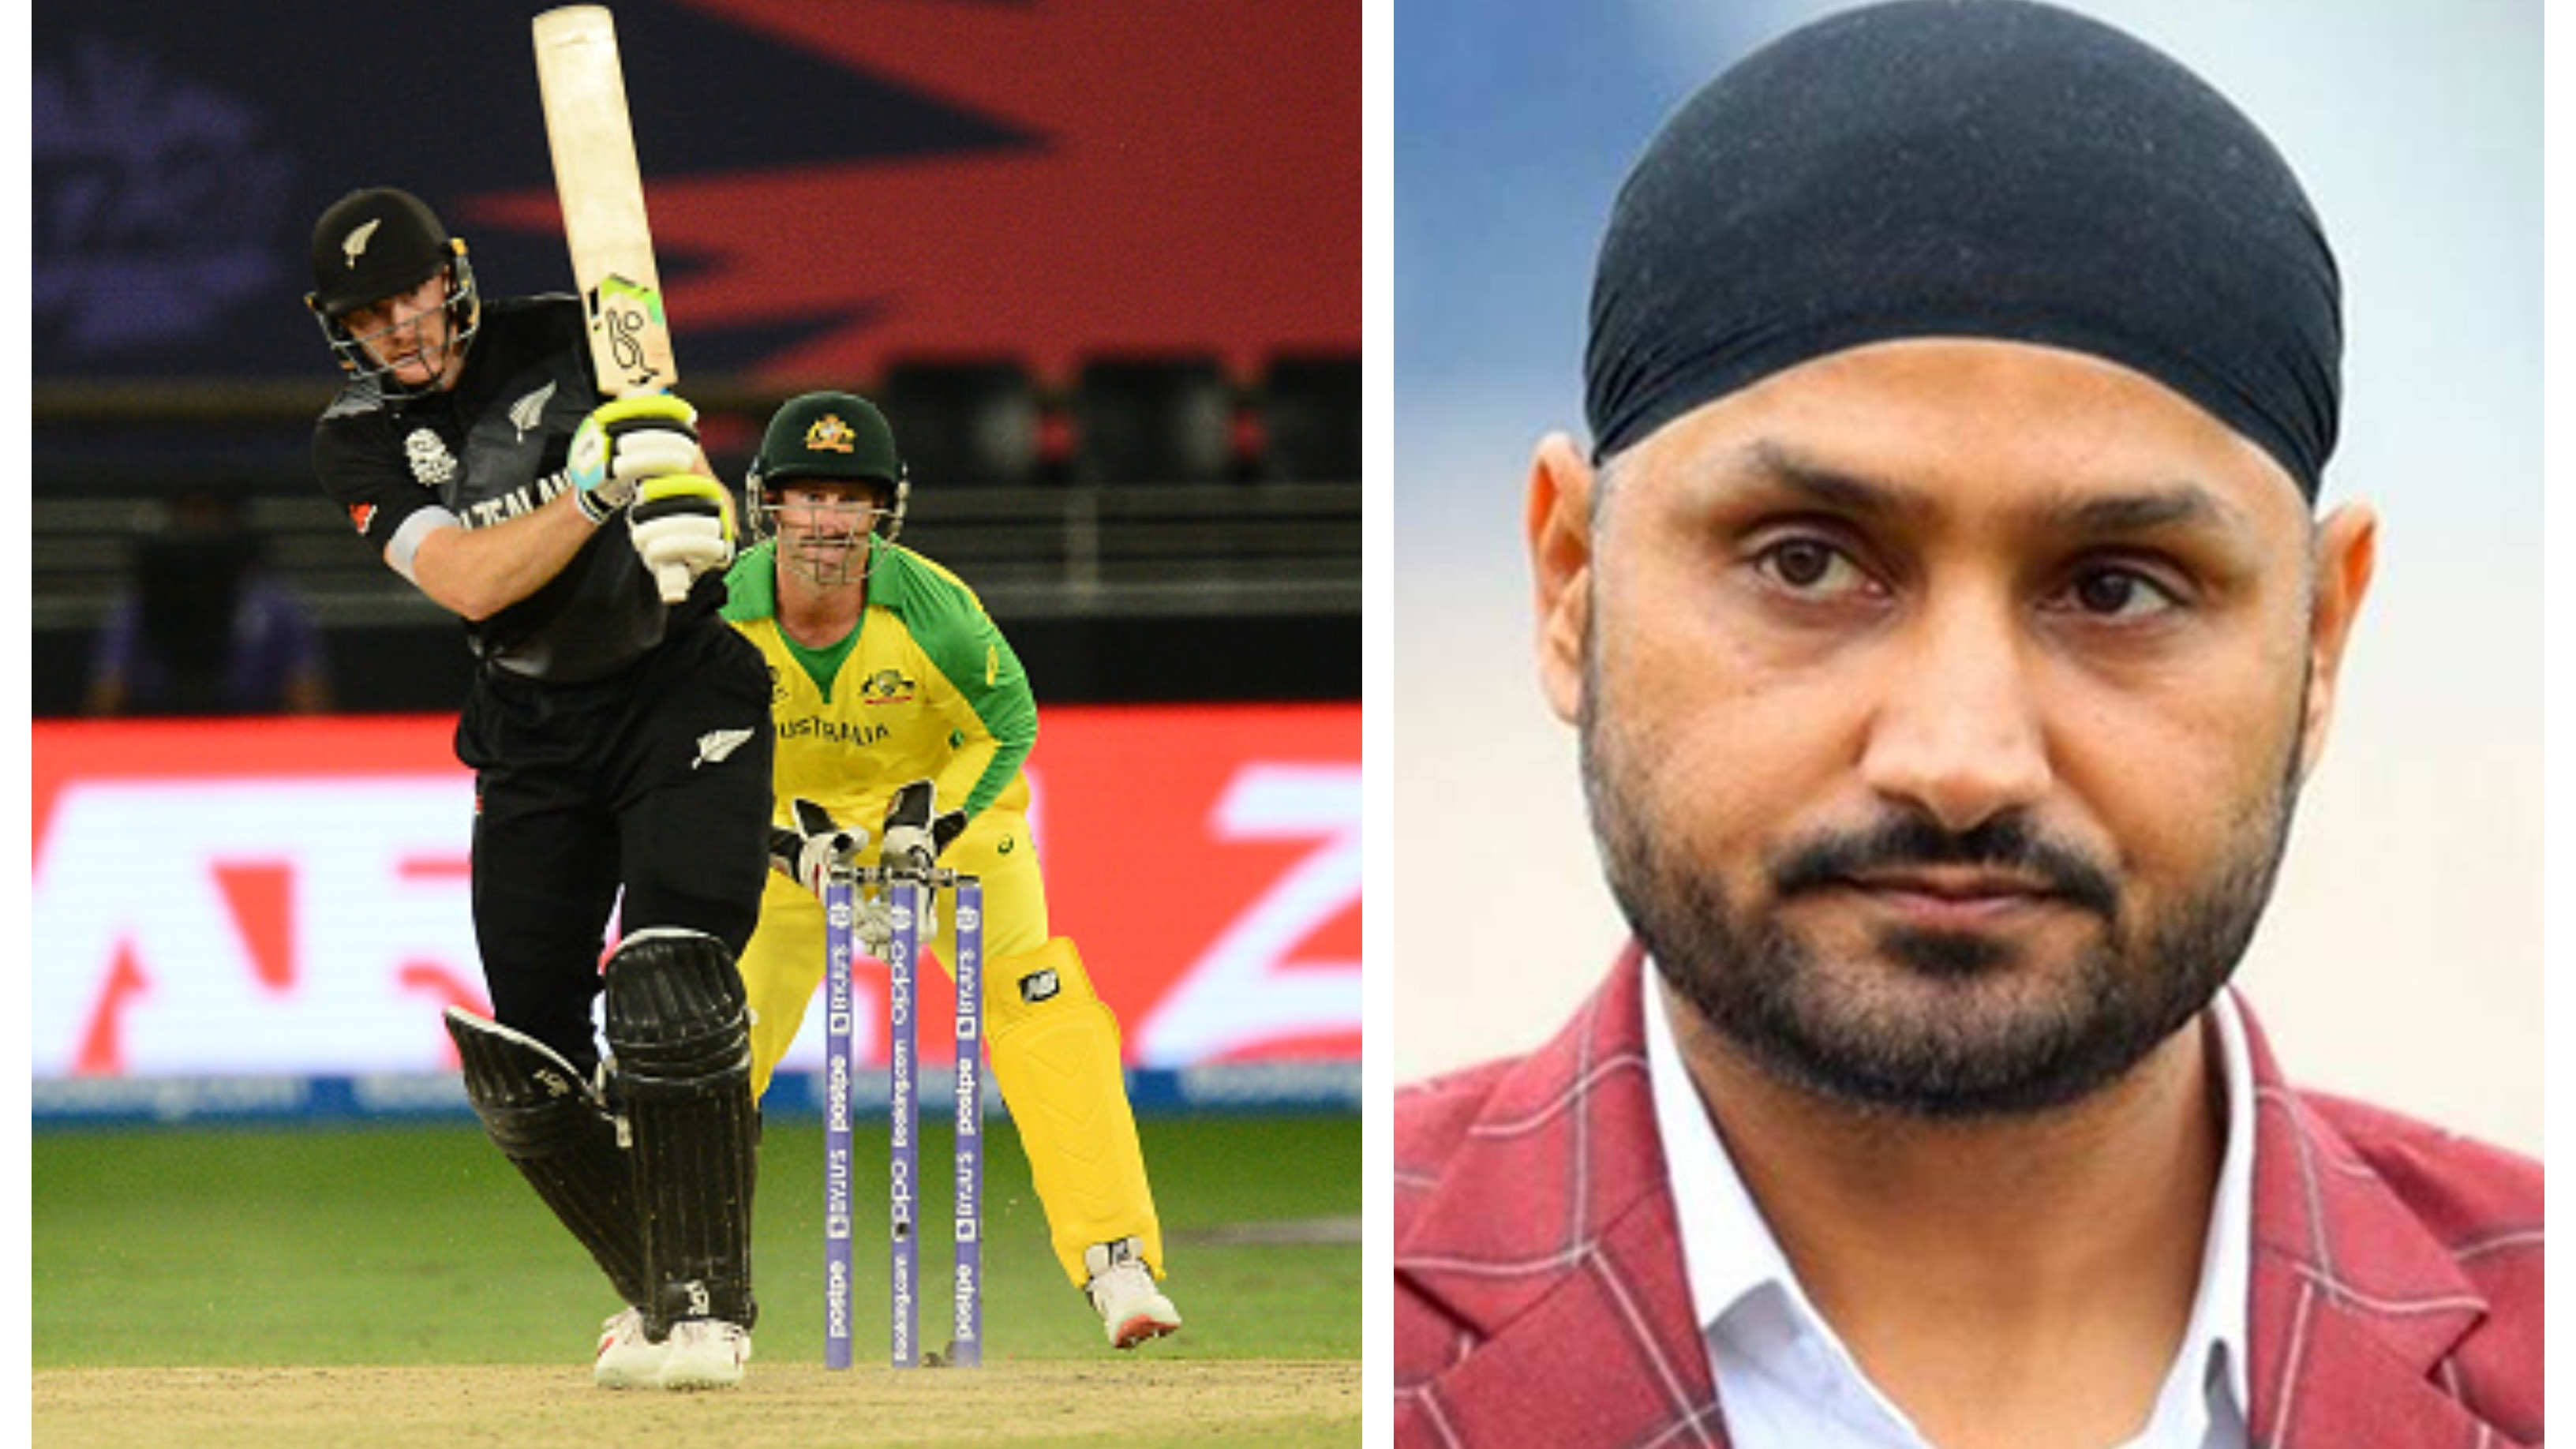 T20 World Cup 2021: Harbhajan critical of Guptill’s slow knock in final, says he played Test match for New Zealand